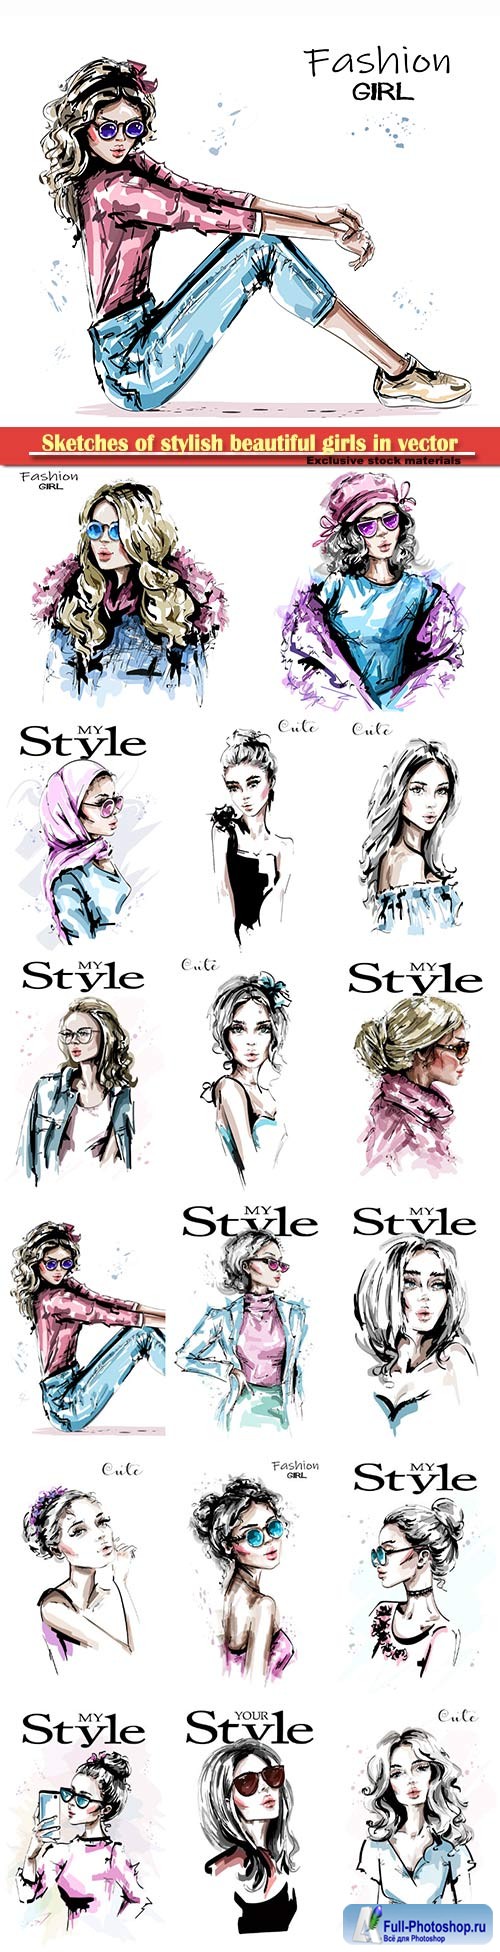 Sketches of stylish beautiful girls in vector